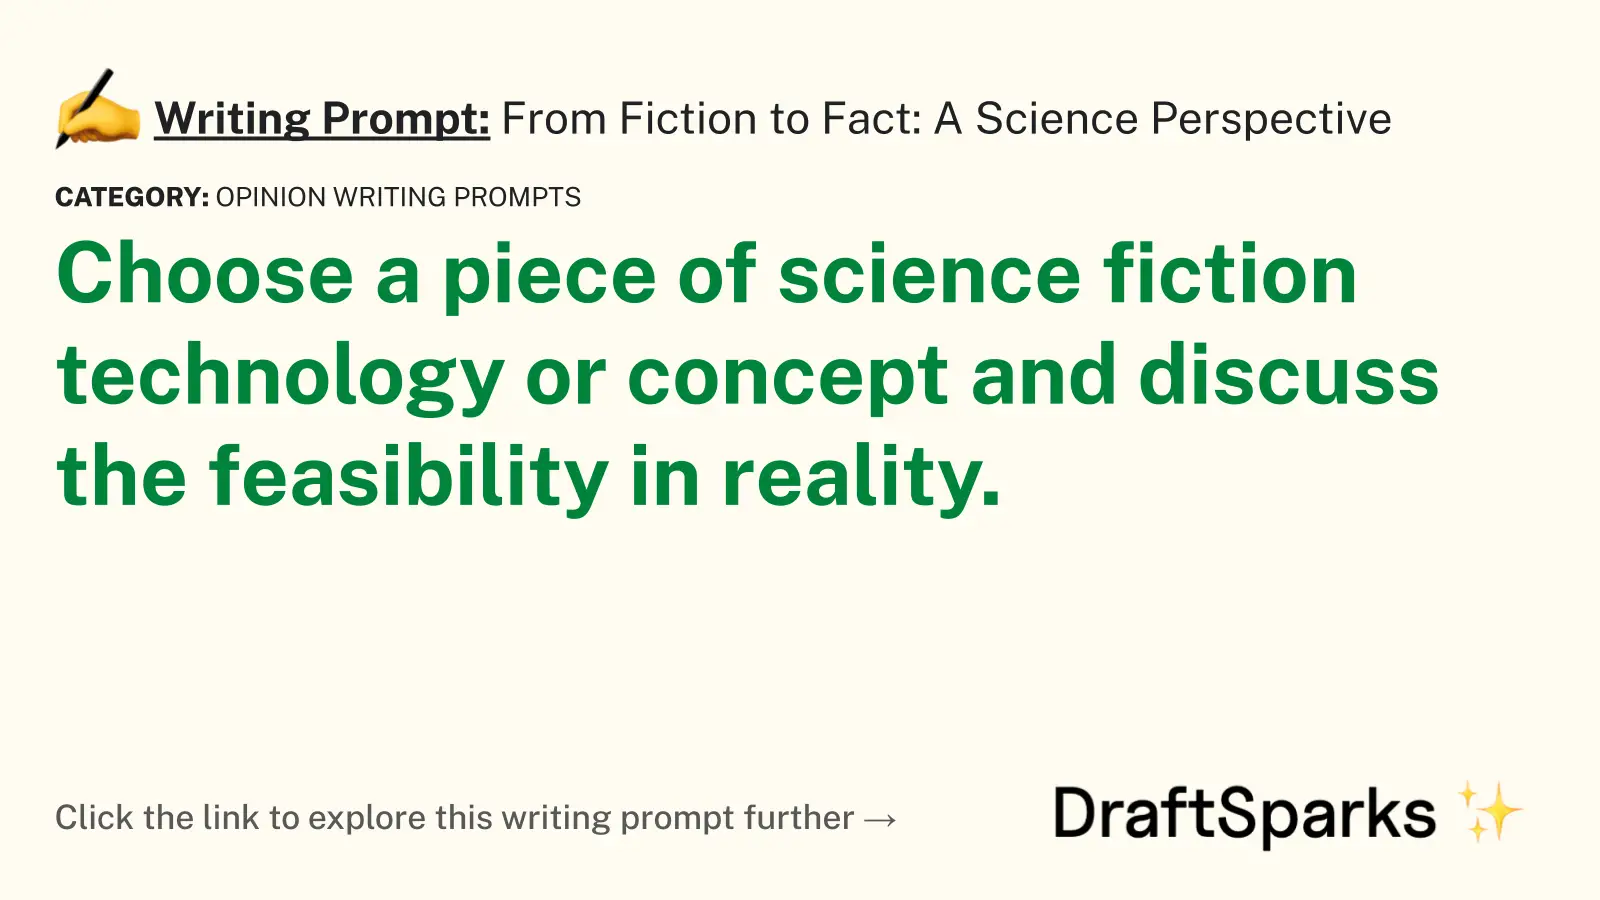 From Fiction to Fact: A Science Perspective